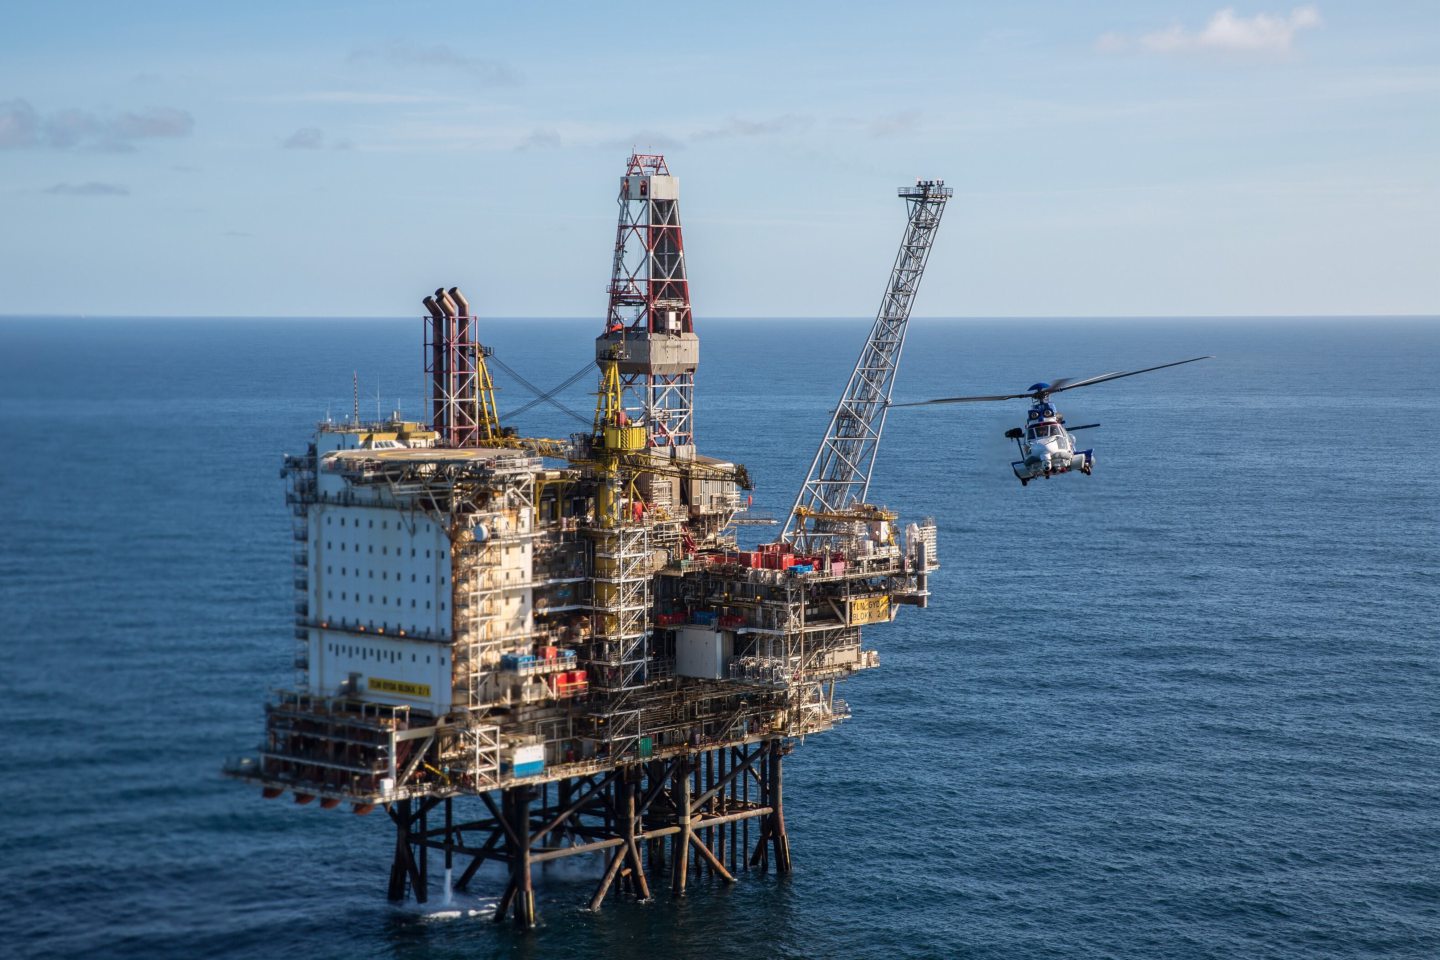 Union survey highlights helicopter safety fears among North Sea offshore workforce